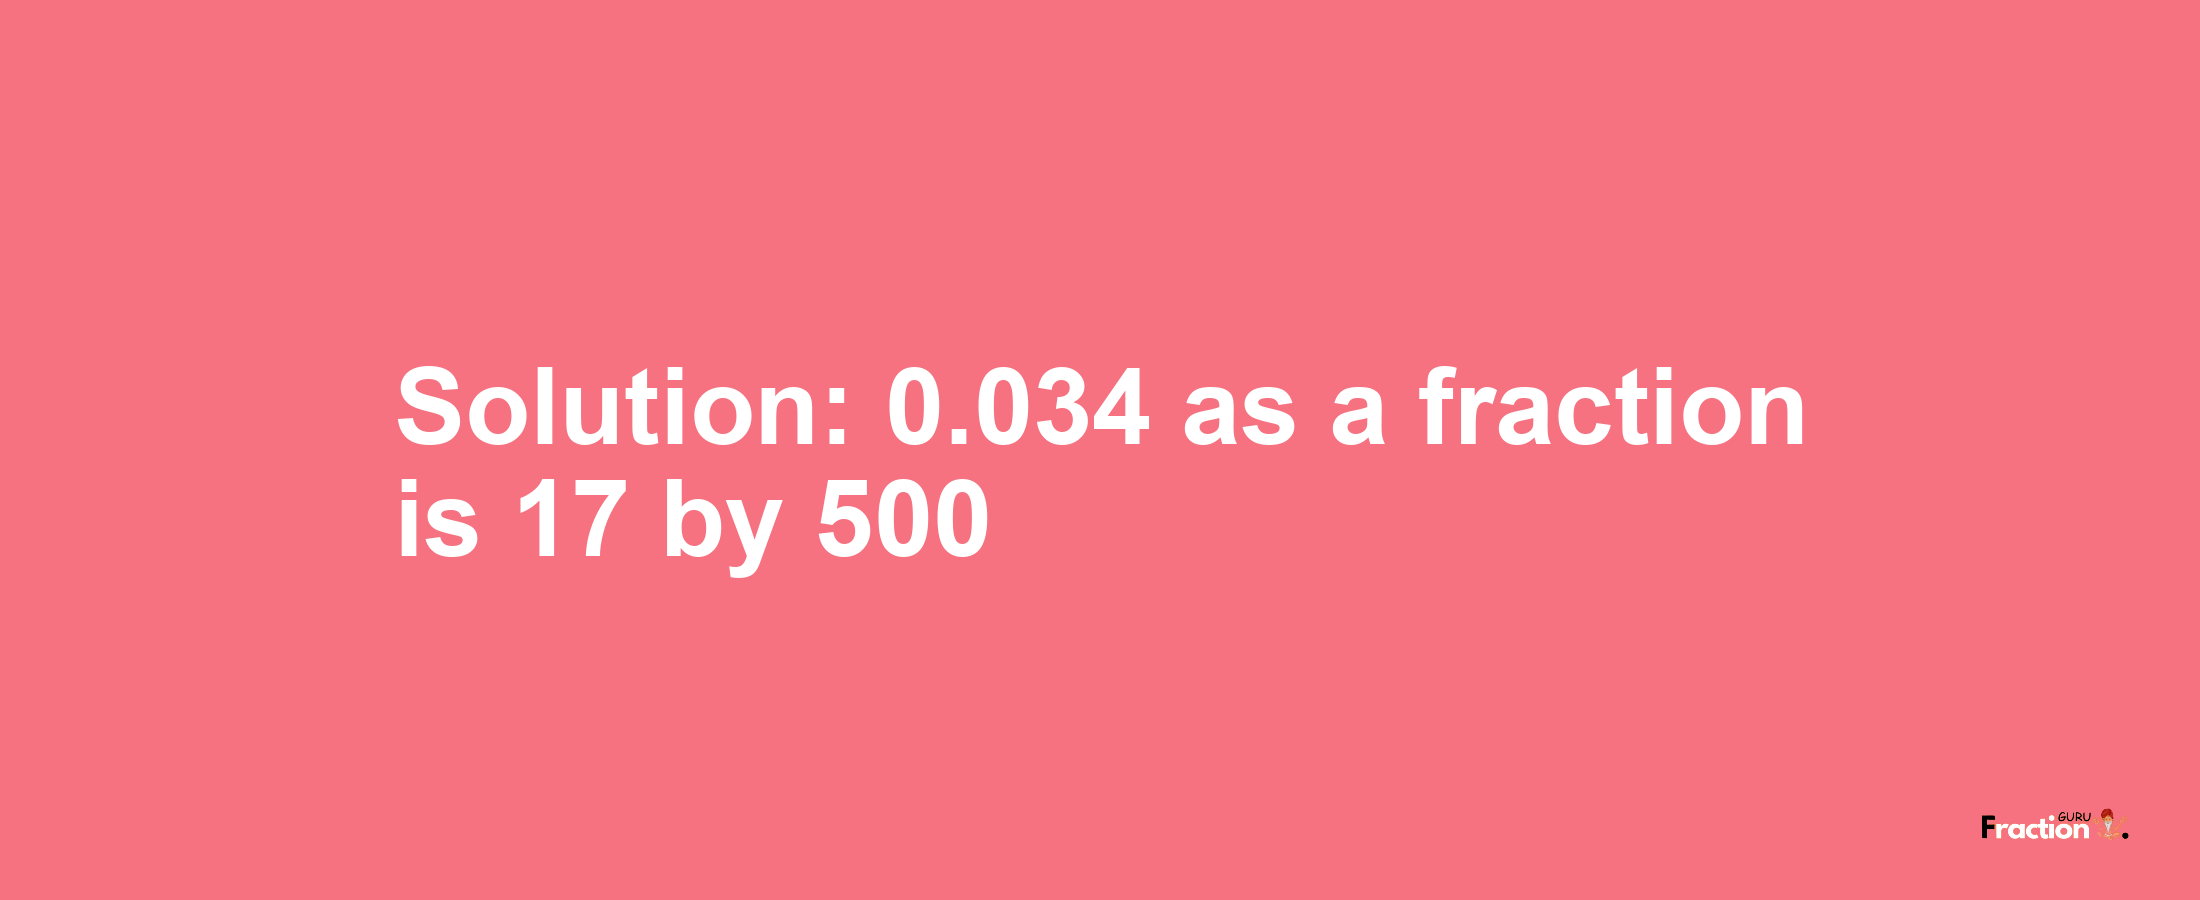 Solution:0.034 as a fraction is 17/500